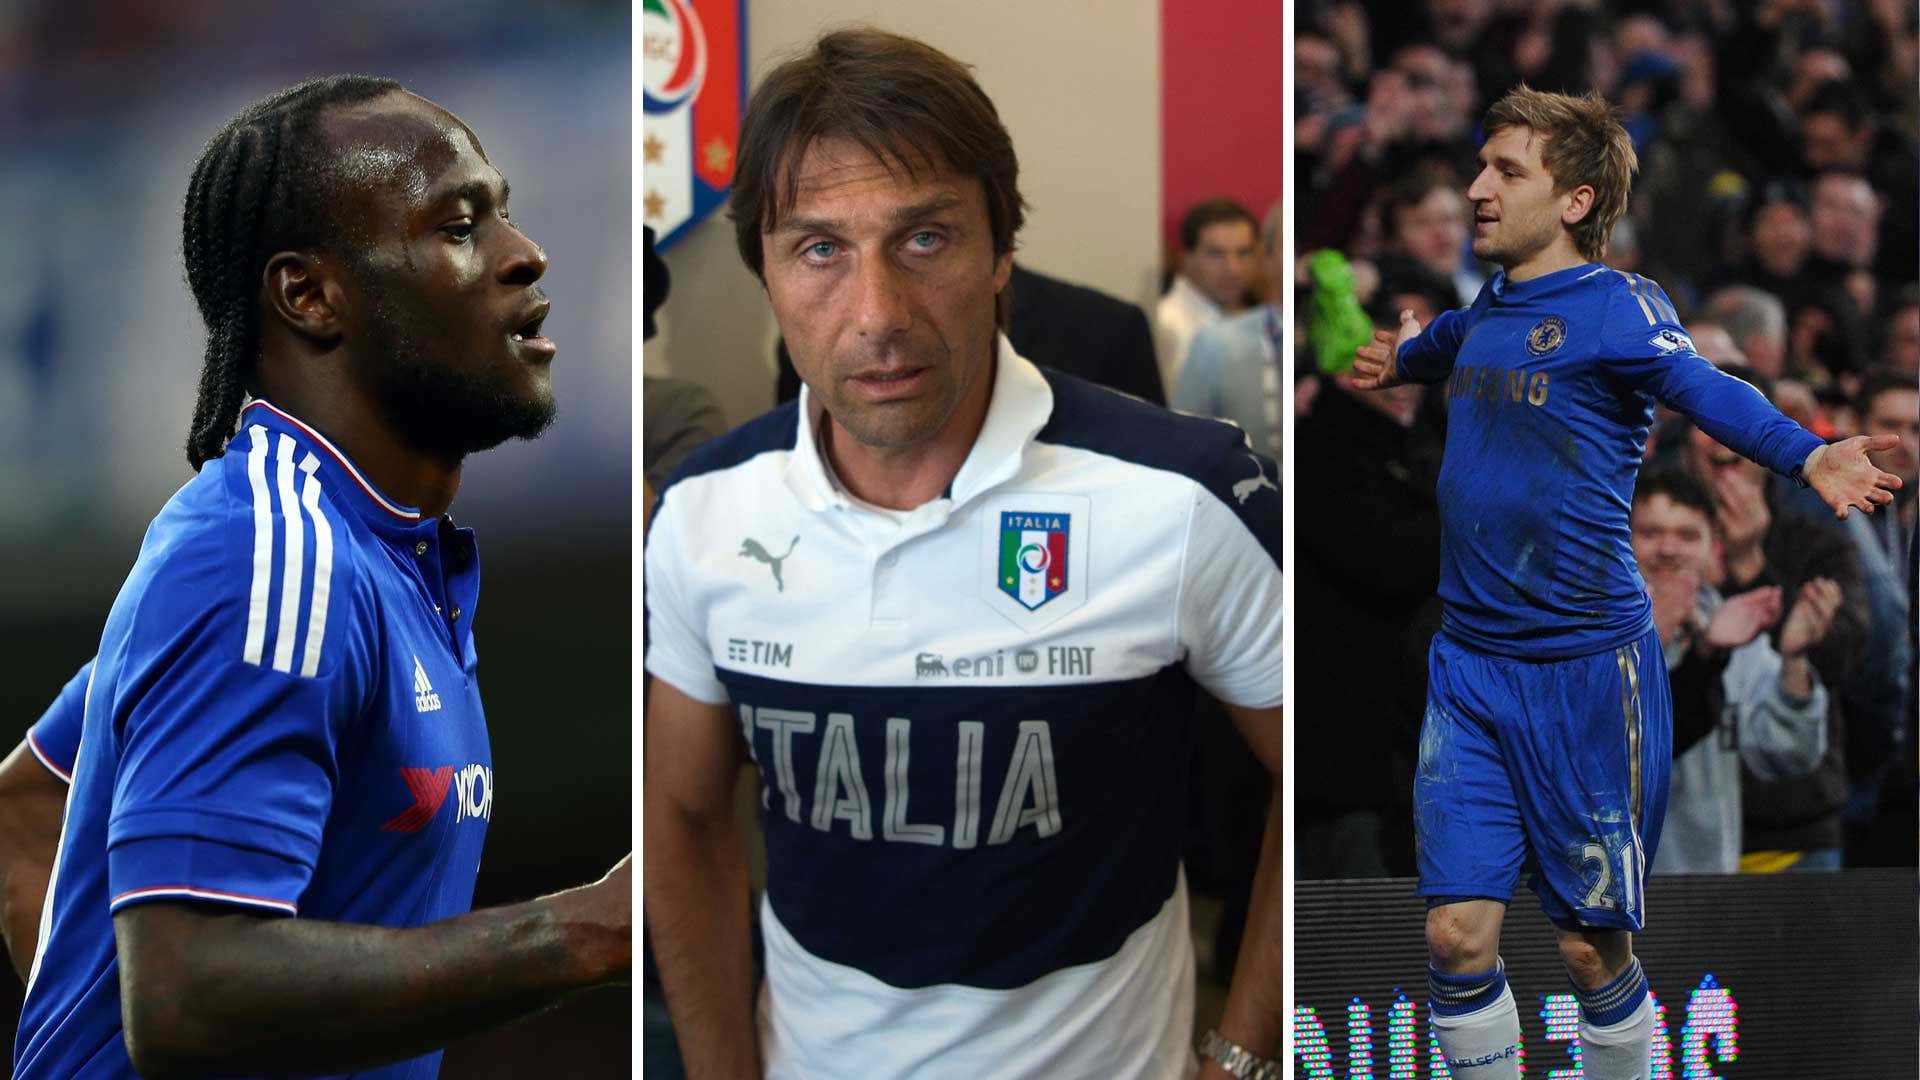 Conte, Moses and Marin